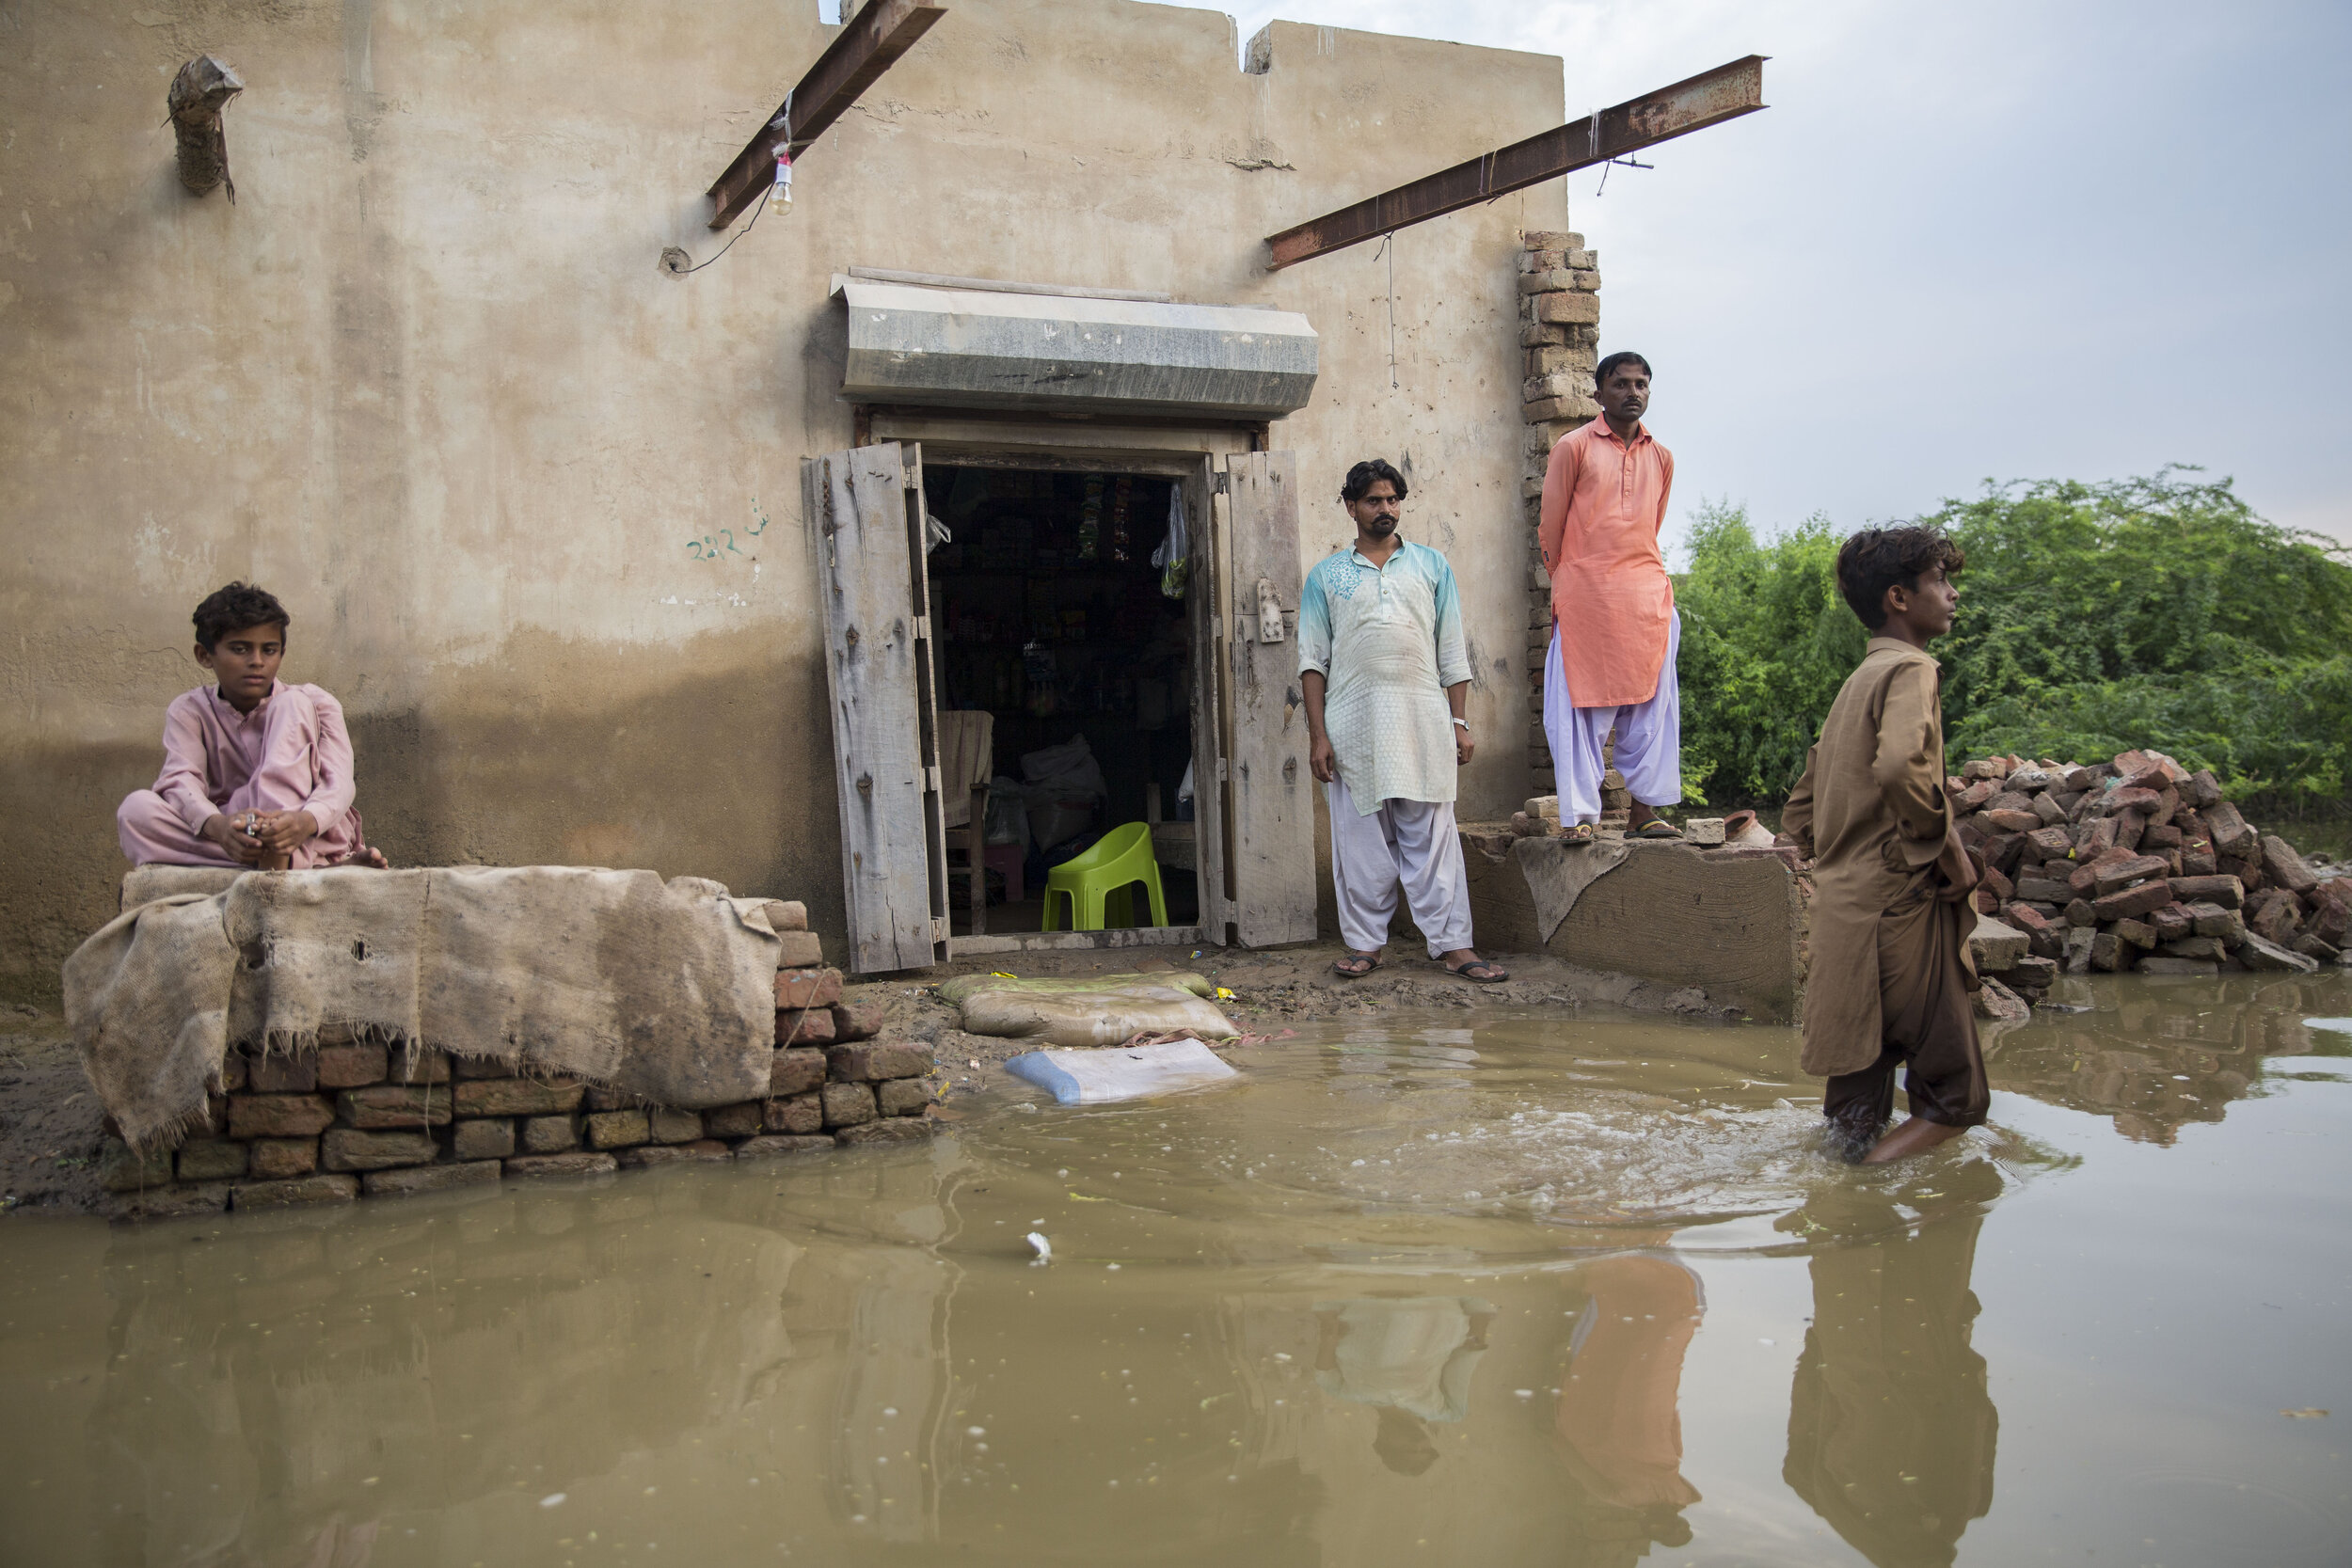  Men stand outside a flooded house in scenes from one of the worst-hit areas due to the recent monsoon floods. 